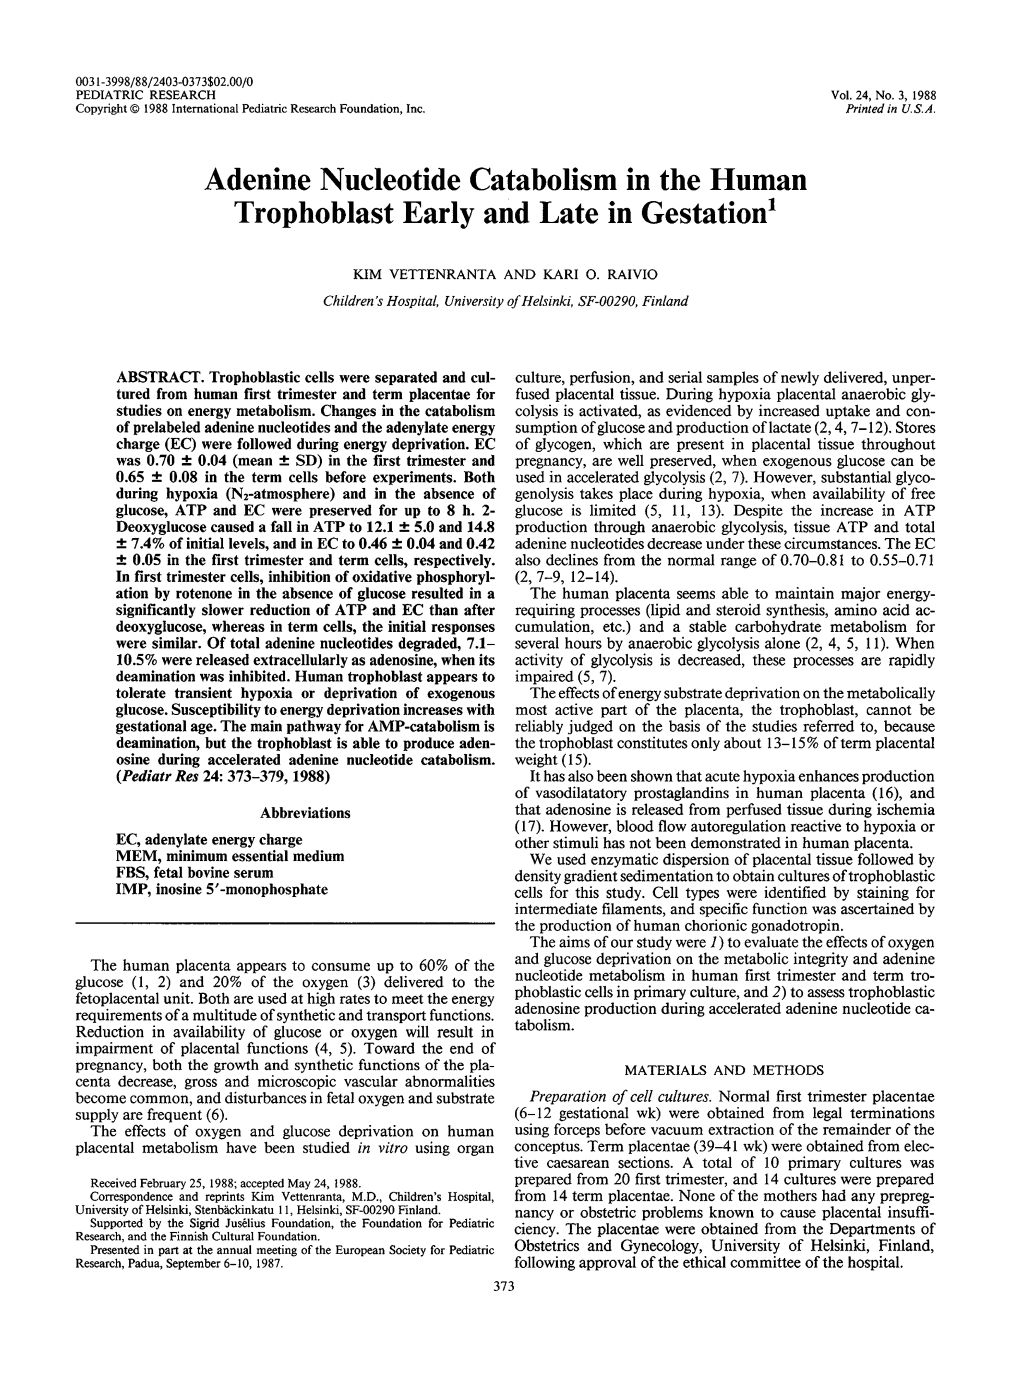 Adenine Nucleotide Catabolism in the Human Trophoblast Early and Late in Gestation1